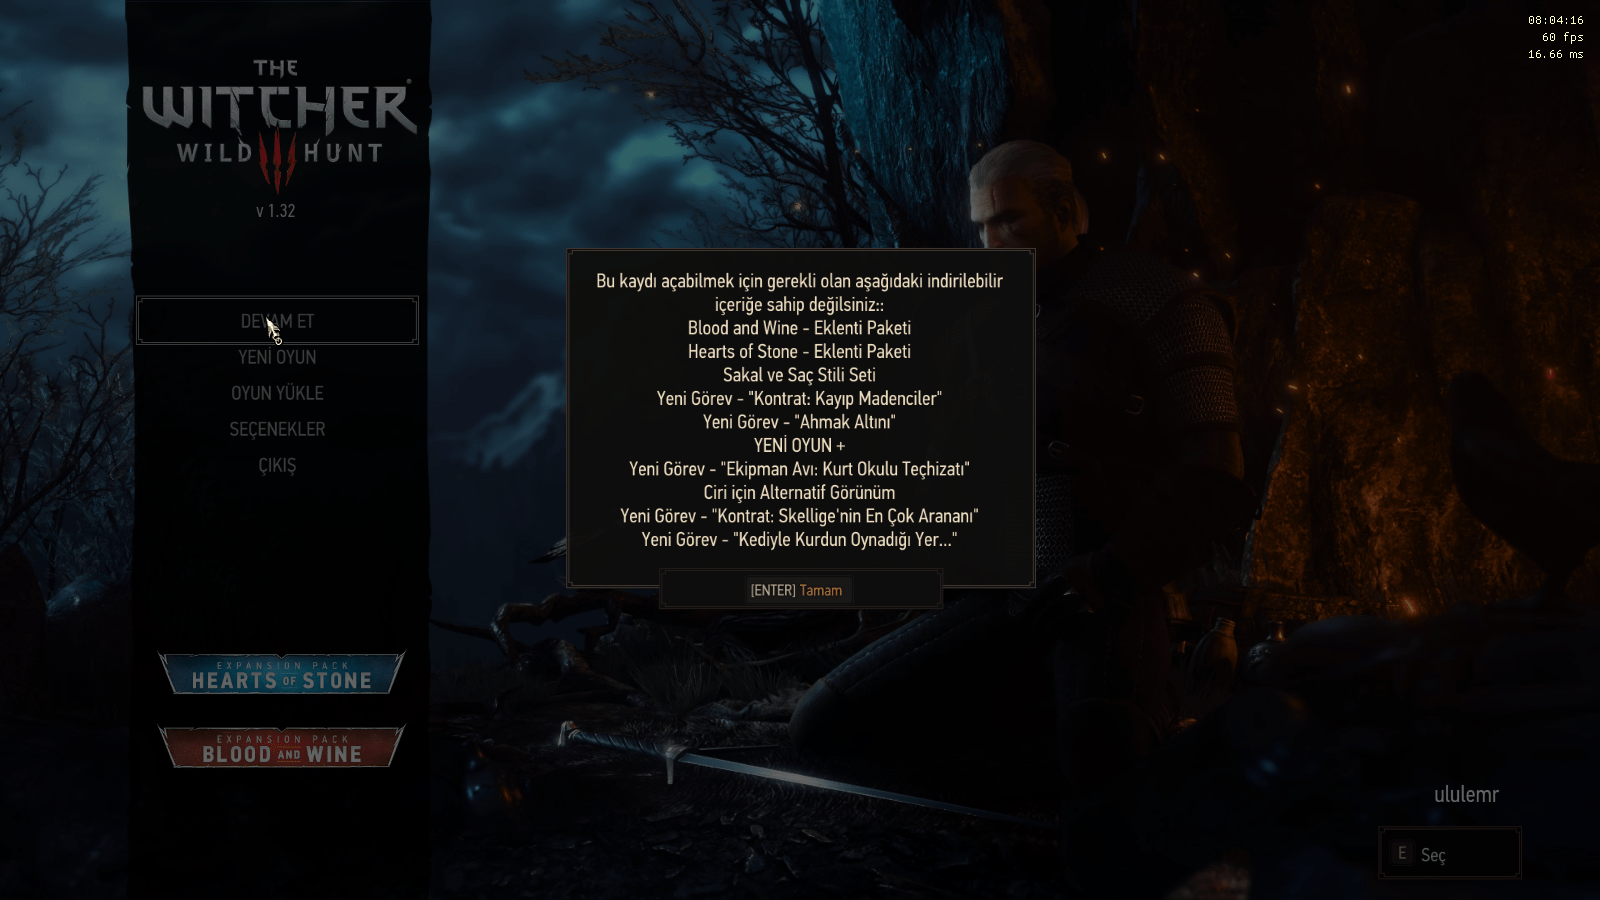 The Witcher 3 Screenshot 2020.01.14 - 08.04.16.63.png